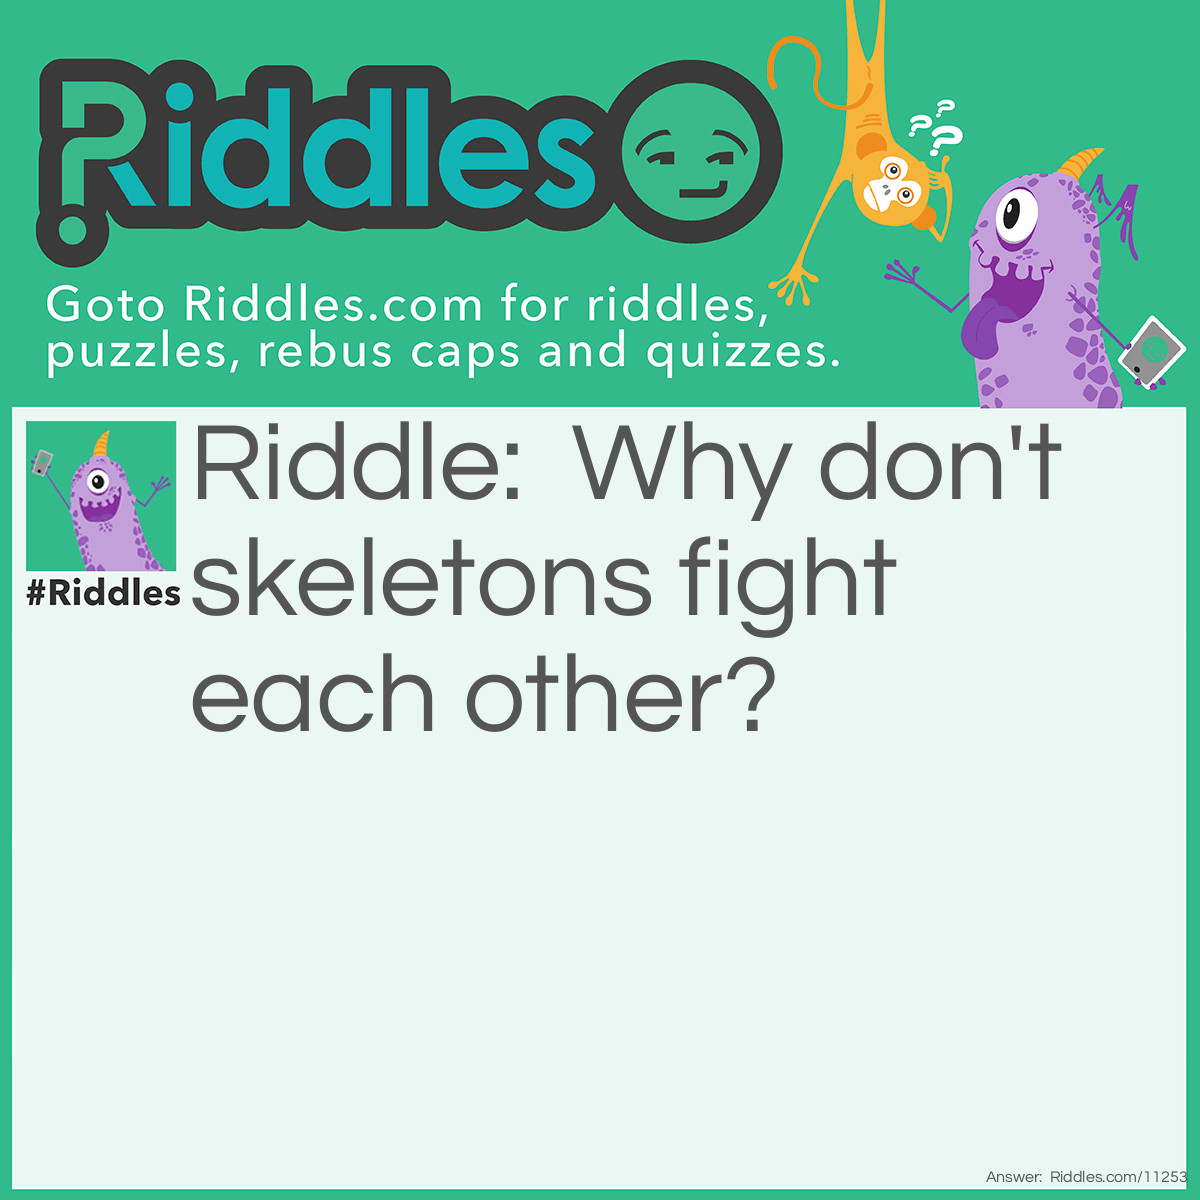 Riddle: Why don't skeletons fight each other? Answer: They don't have the guts.